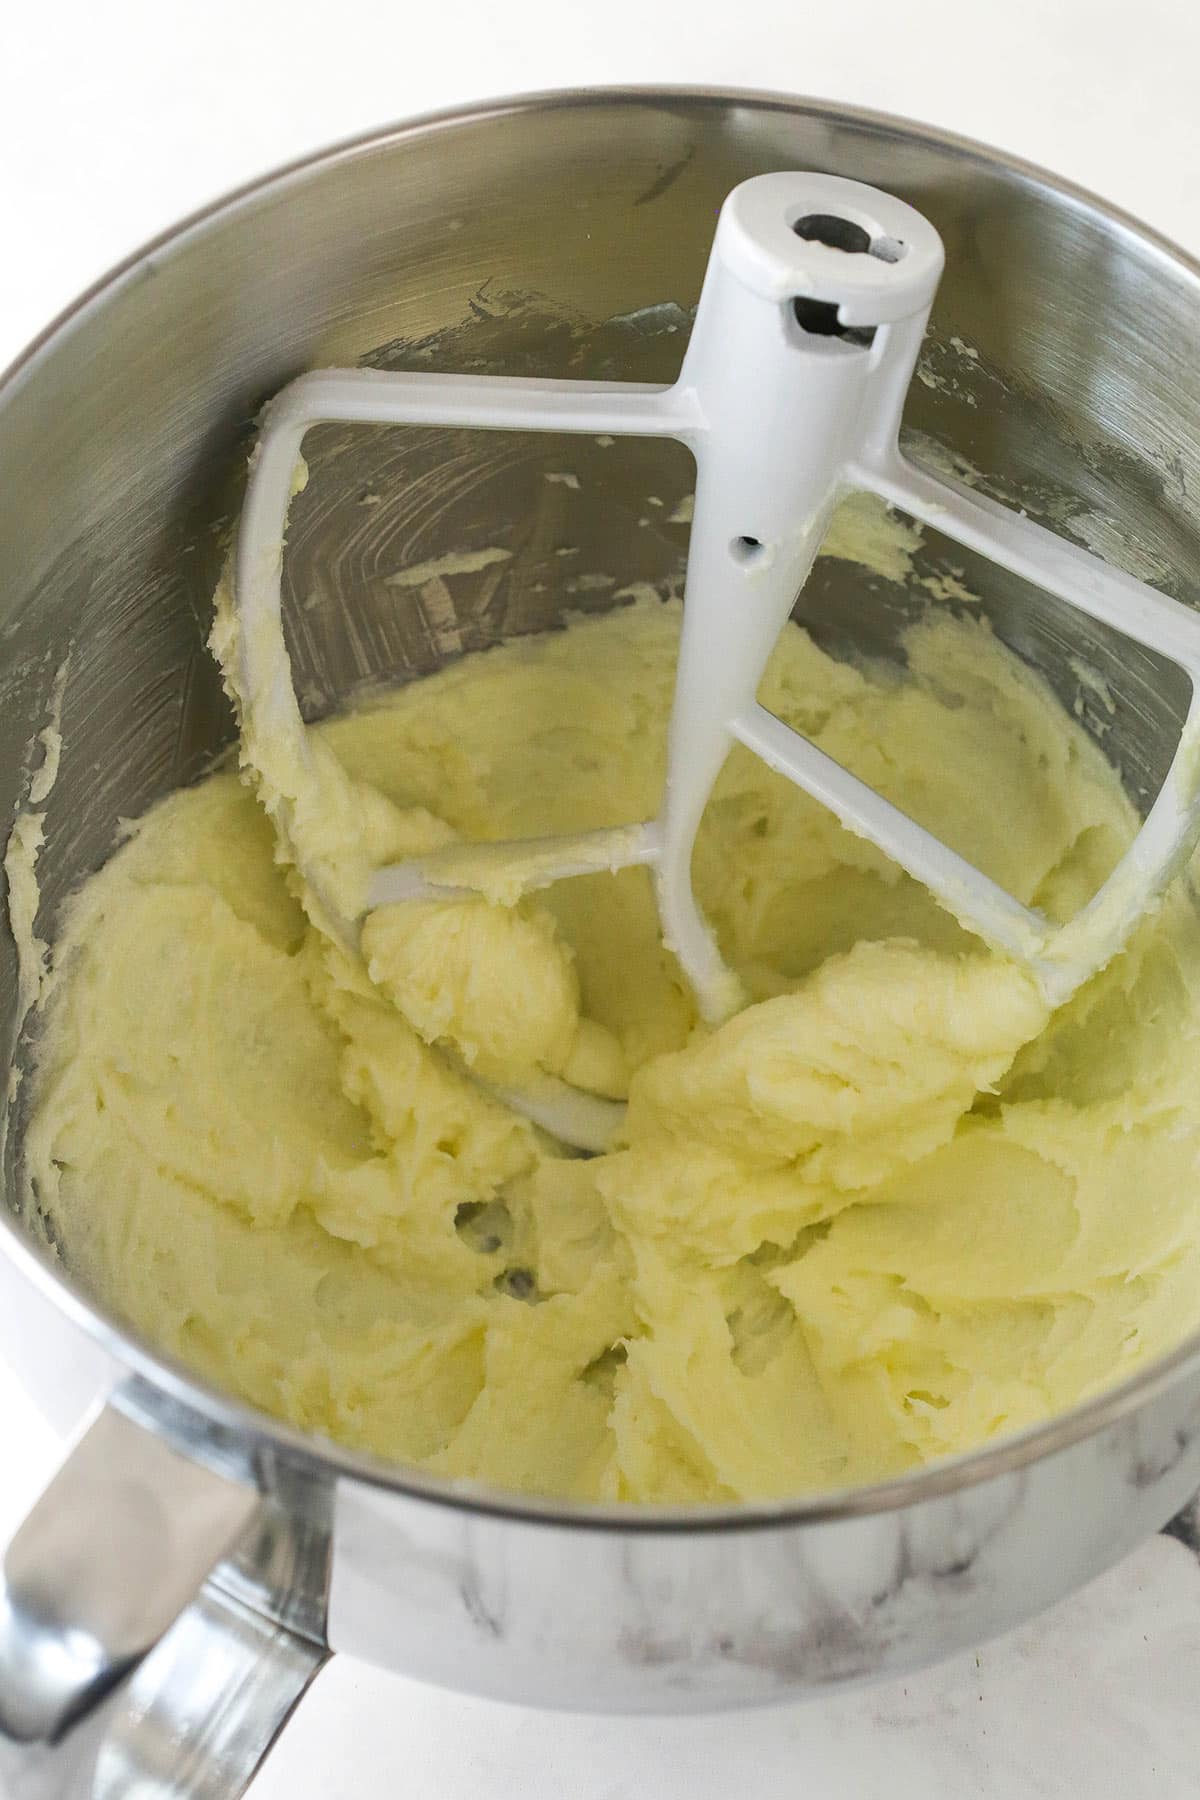 butter and sugar creamed together in mixer bowl